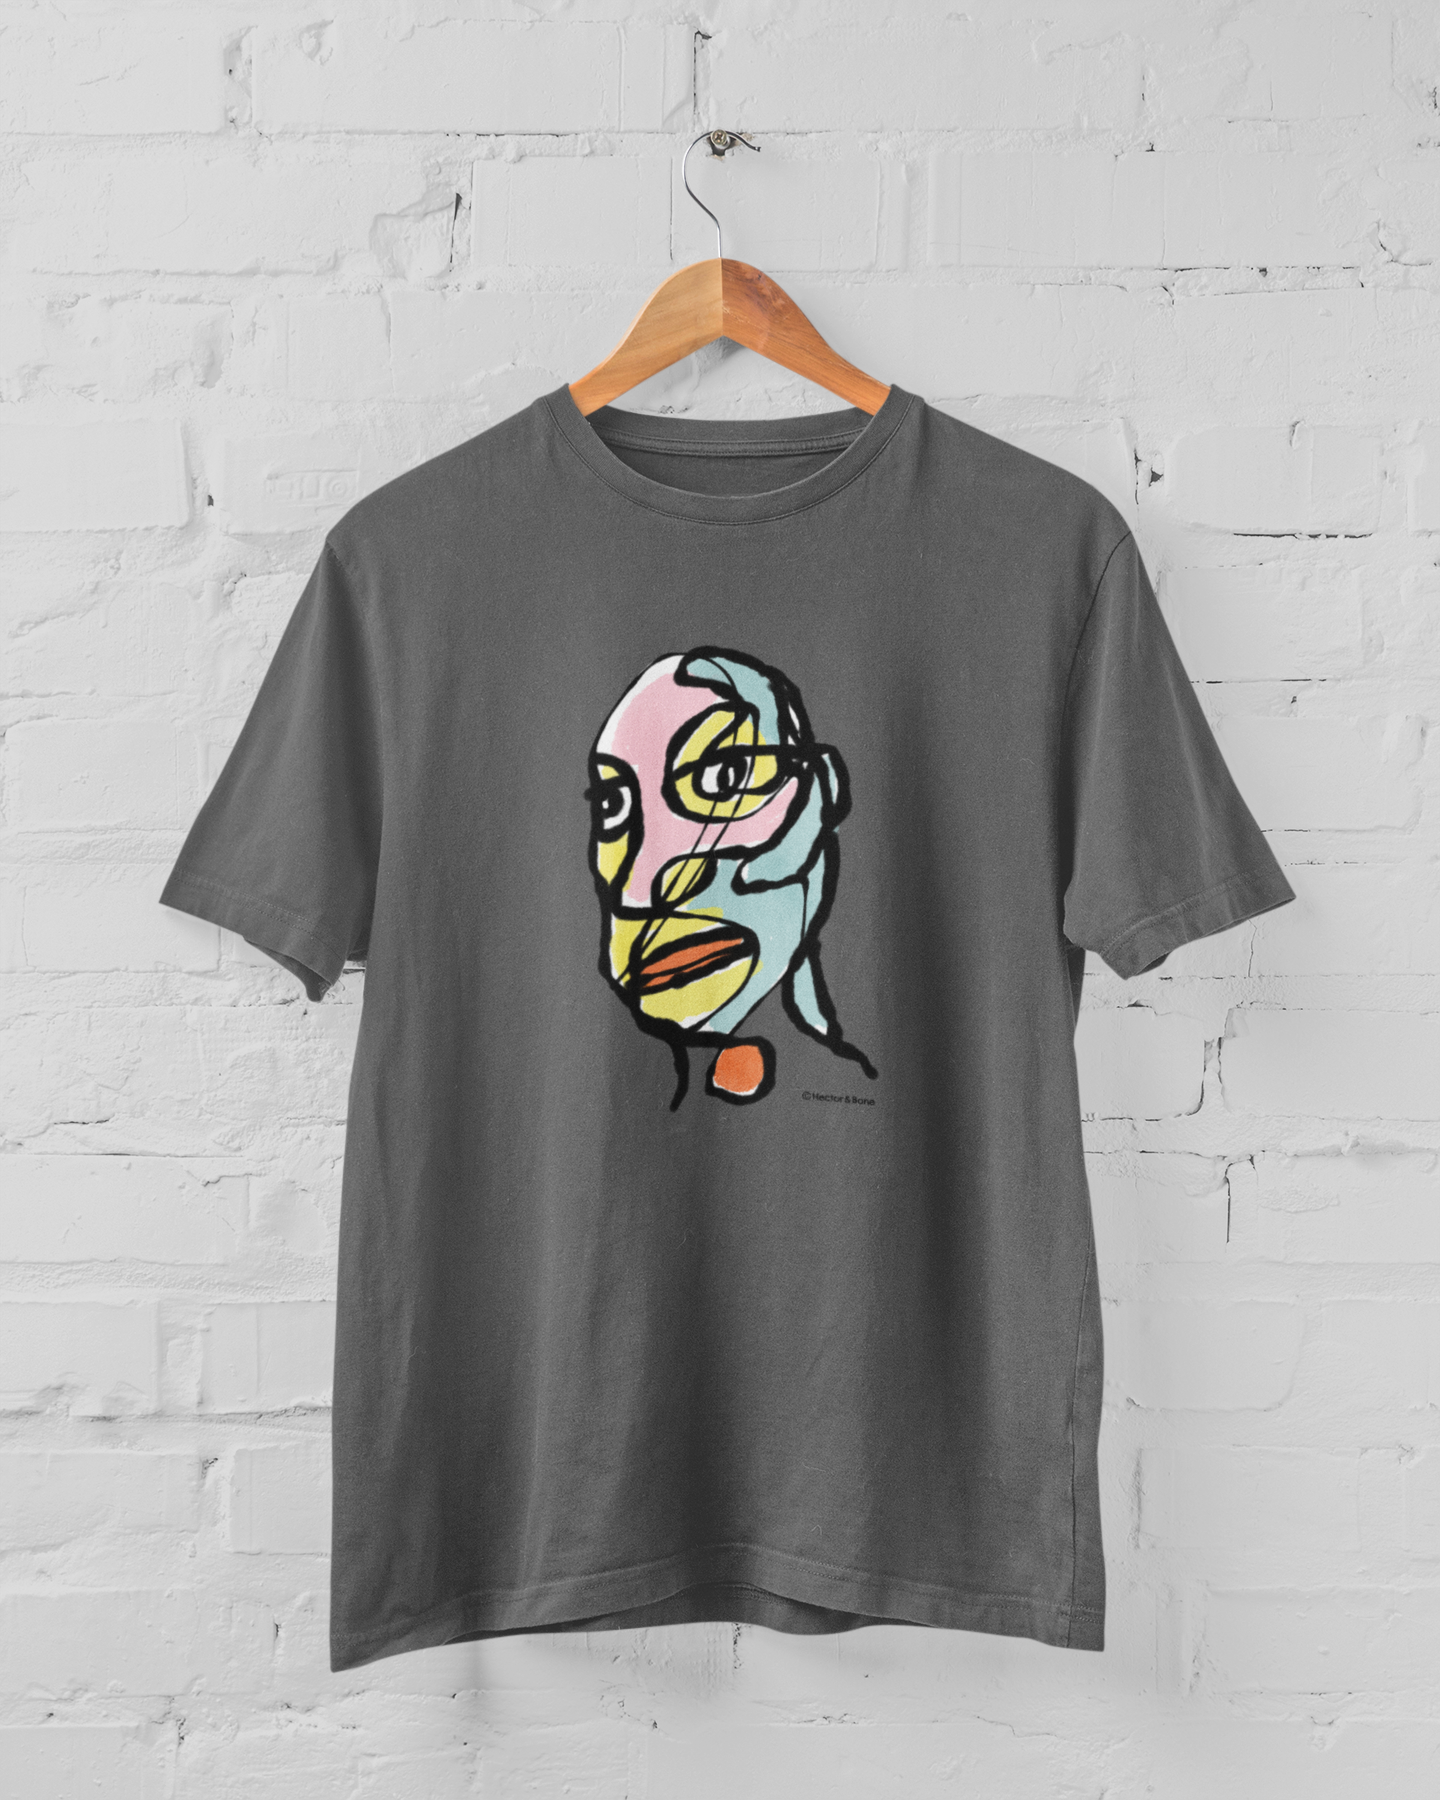 Abstract man portrait t-shirt - Edgy Eddie abstract man's face illustrated on a vegan dark grey cotton t-shirt by Hector and Bone